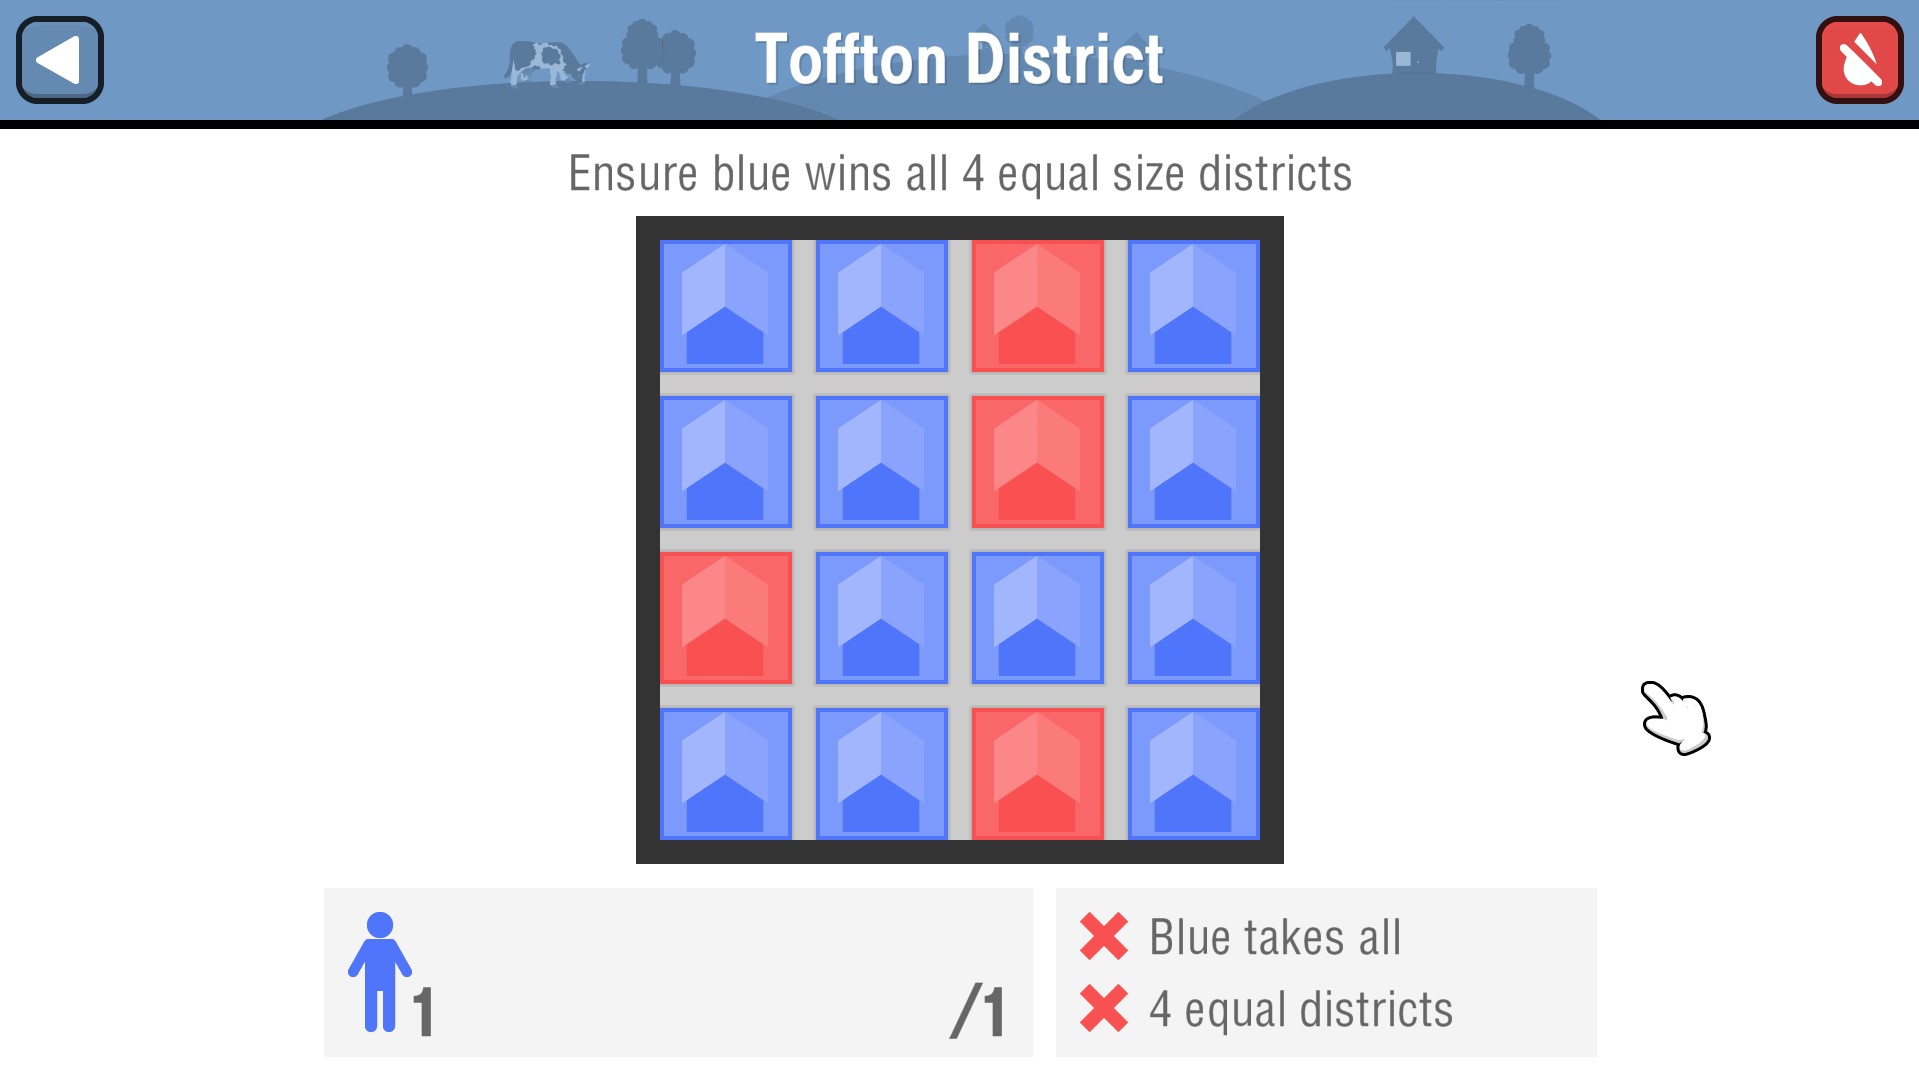 Toffton District